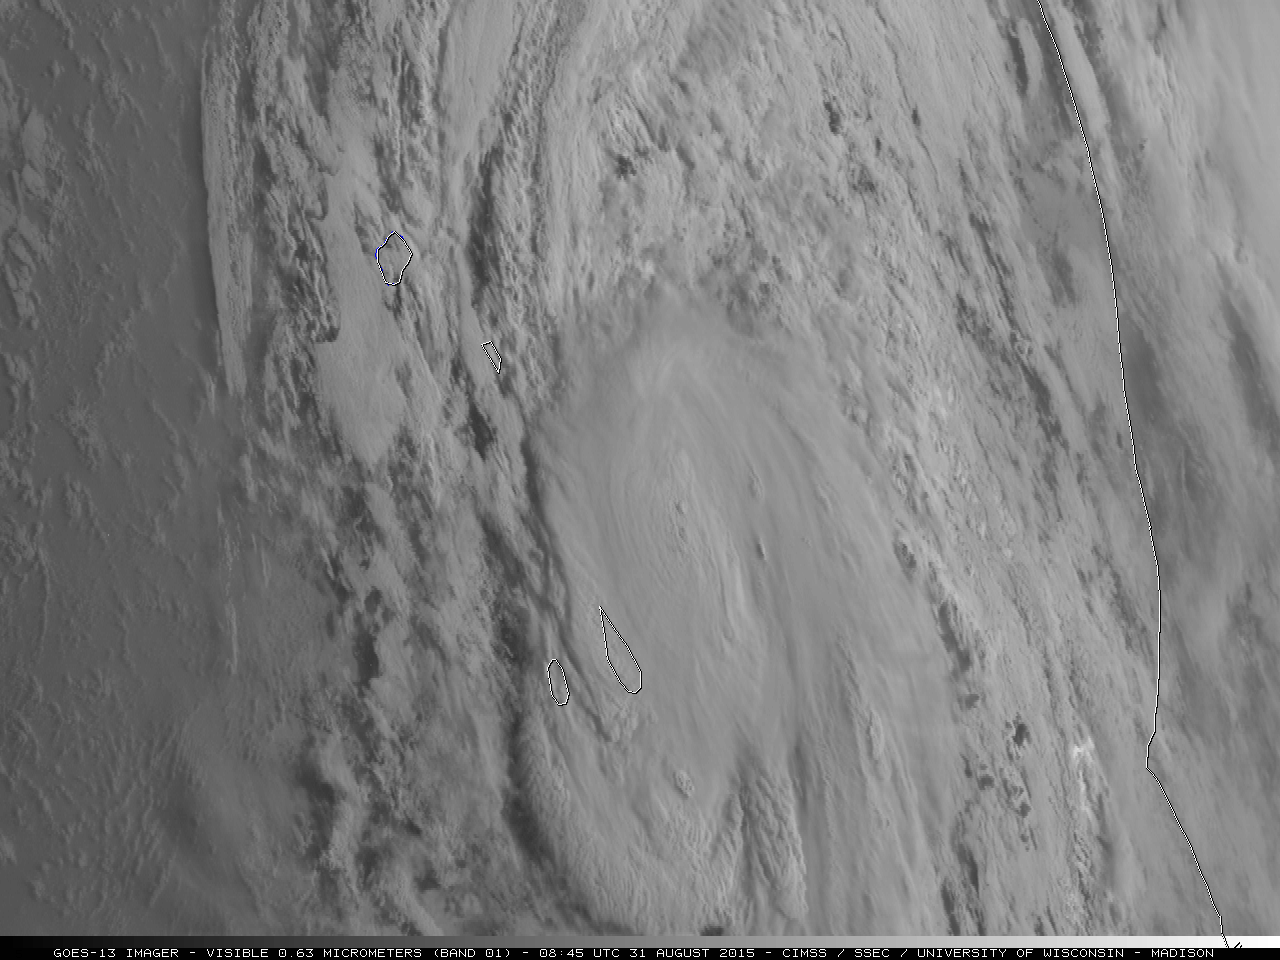 GOES-13 Visible (0.63 um) and Infrared (10.7 um) images [click to enlarge]